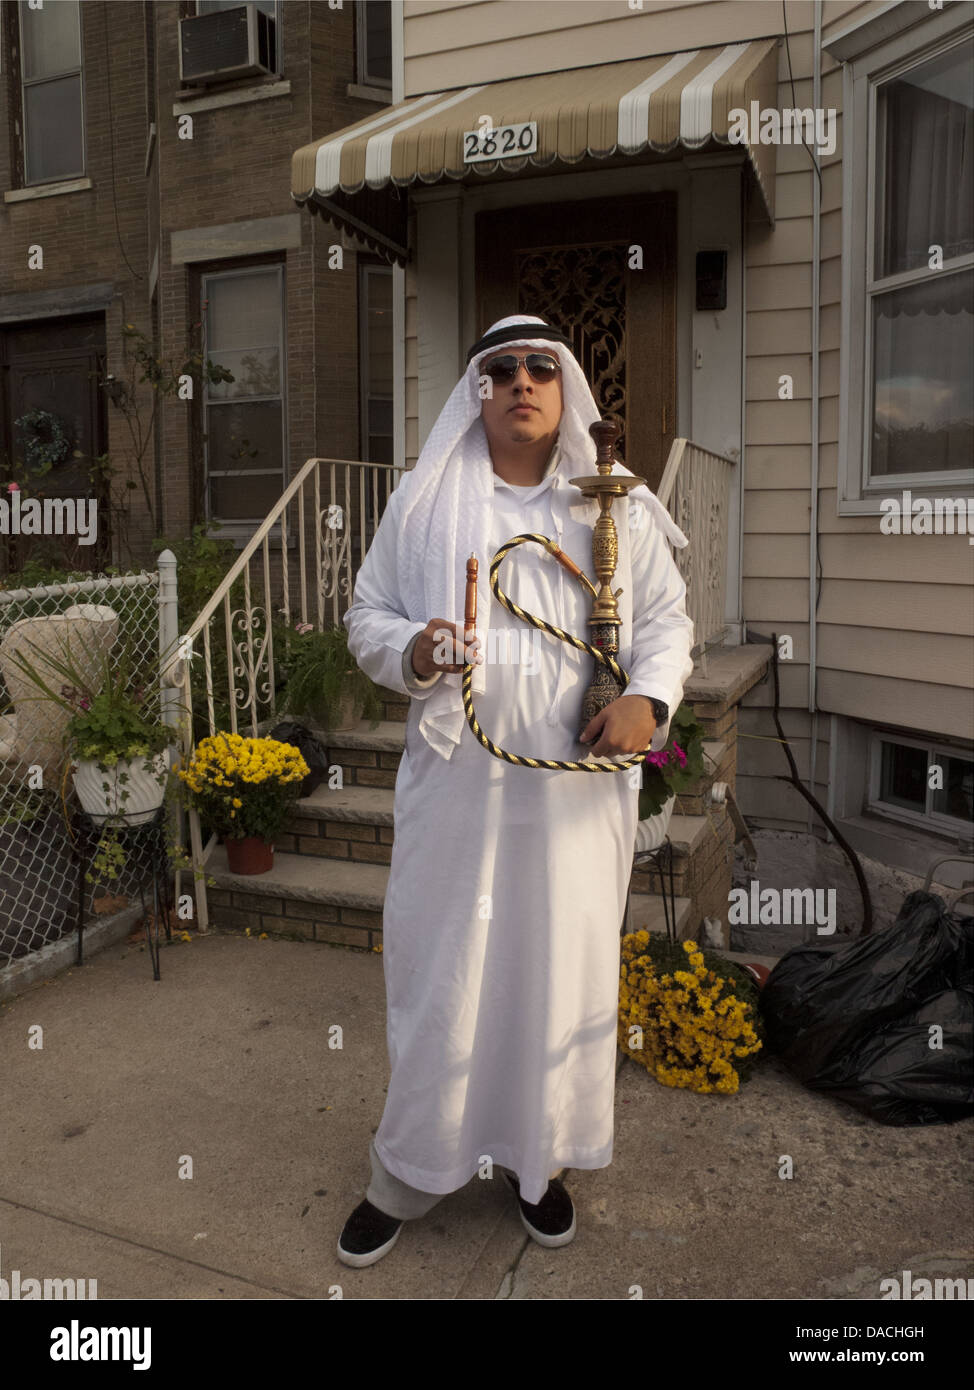 Halloween in the Kensington section of Brooklyn, NY, 2010. Man costumed as Arab sheik. Stock Photo